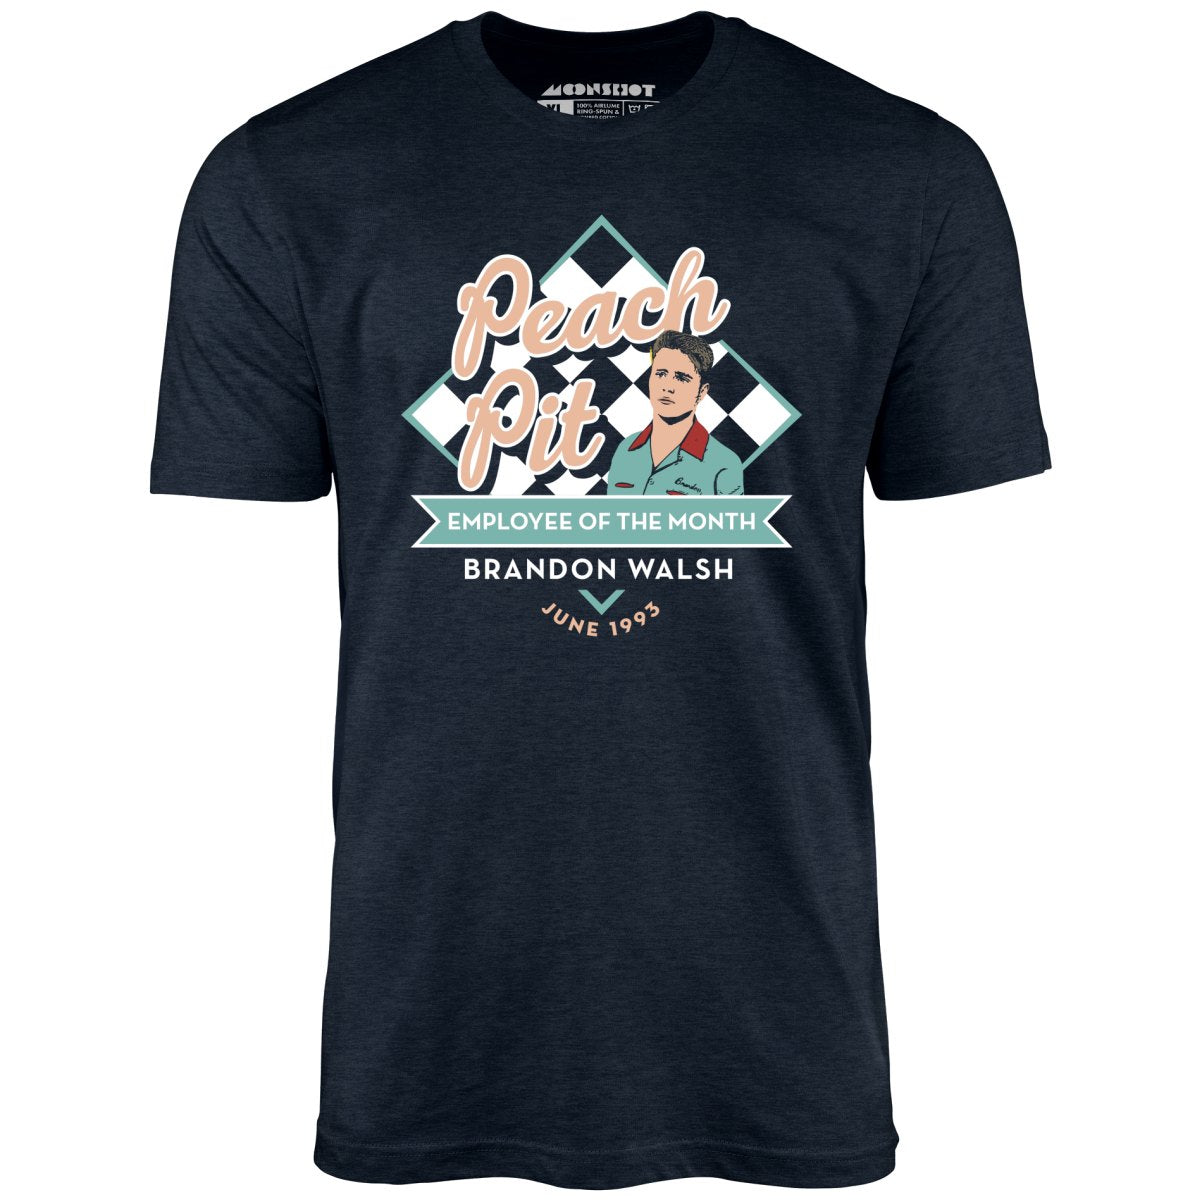 Peach Pit Employee of The Month - 90210 - Unisex T-Shirt